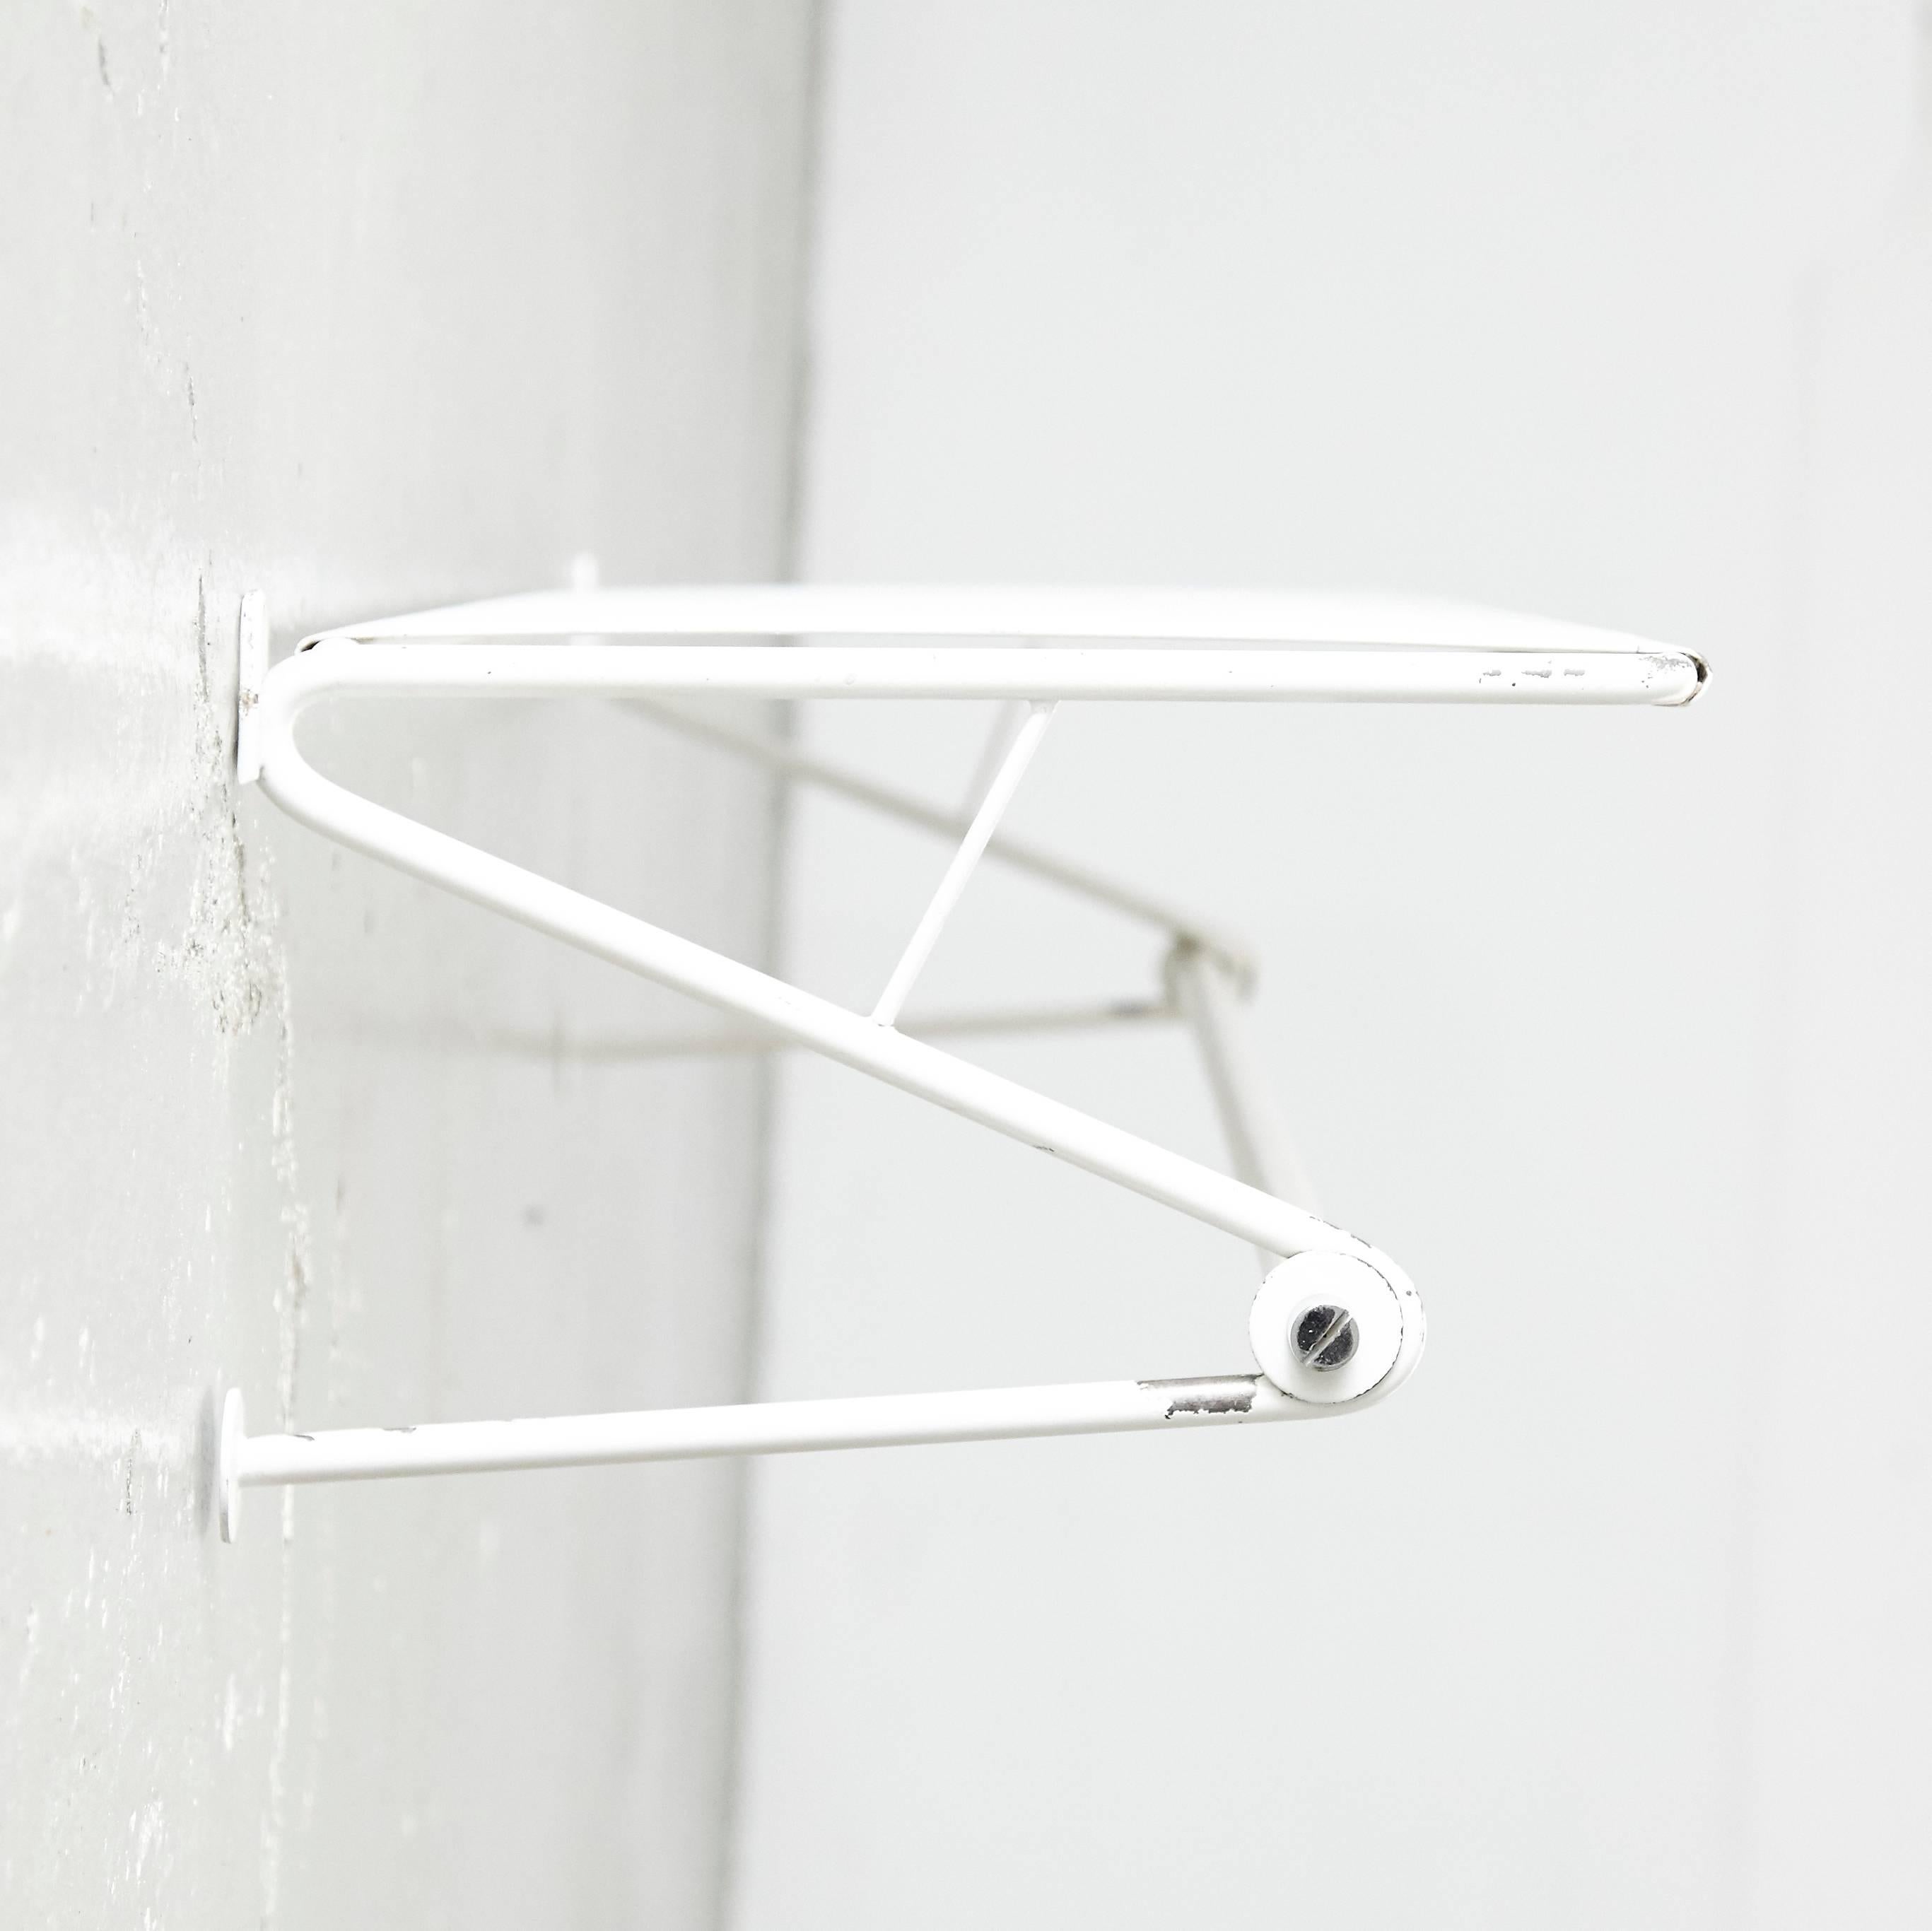 Coat rack designed by Mathieu Matégot.
Manufactured by Artimeta (Netherland), circa 1950.
Perforated, lacquered metal.

In good original condition, with minor wear consistent with age and use, preserving a beautiful patina.

Mathieu Matégot